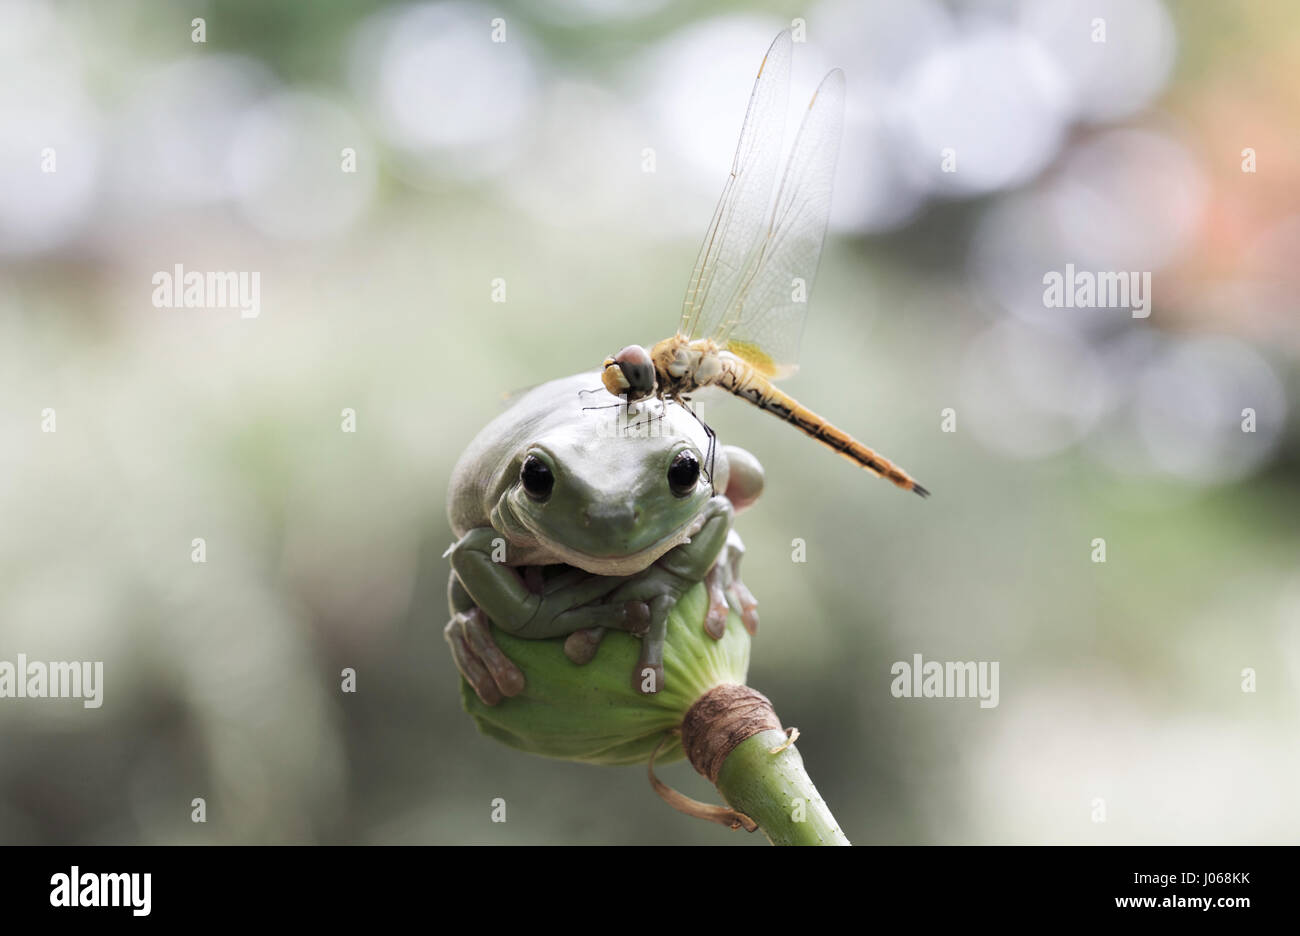 JAKARTA, INDONESIA: A DRAGONFLY has been snapped using a live frog’s head as an improvised helipad. Pictures show the flying creature making an unlikely pit stop on top of an unsuspecting dumpy tree frog’s head.  Spending a total of three minutes investigating its landing pad, the dragonfly realises the spot is not fit for purpose before re-launching into the air. Amateur photographer Erni Wijaya (34) from Jakarta, Indonesia happened to witness this funny interaction in his hometown. Stock Photo